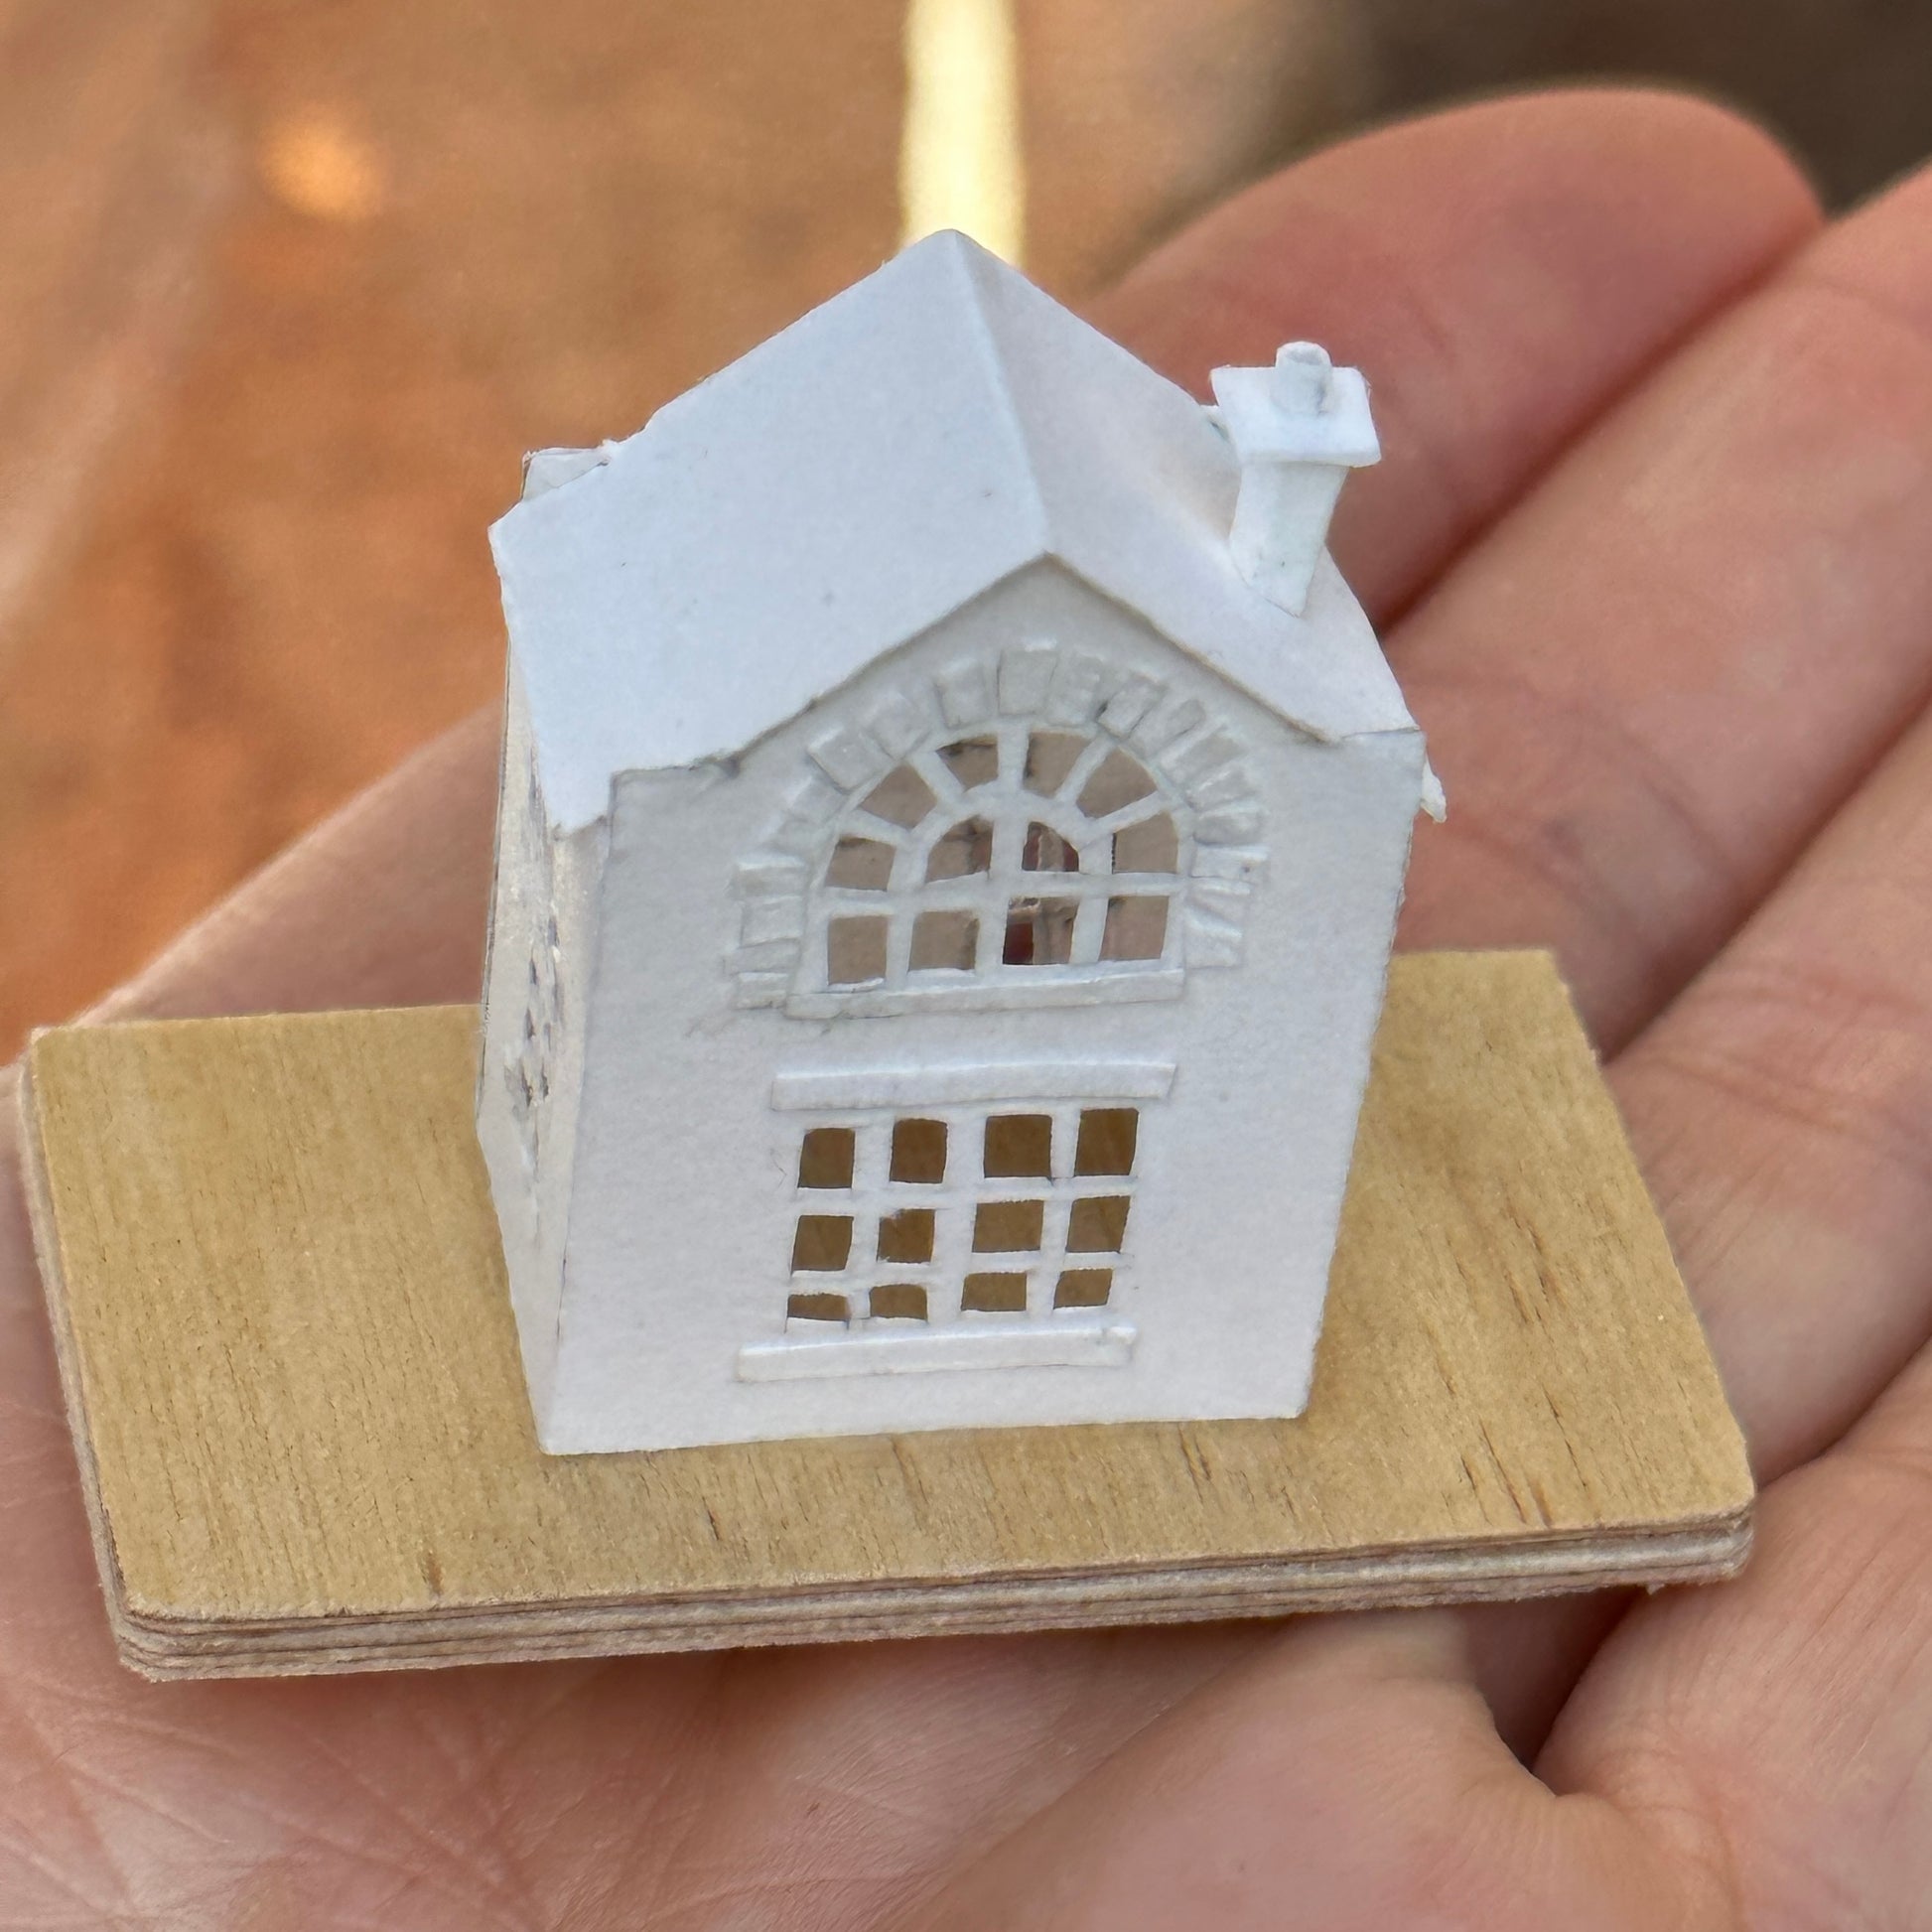 Miniature handmade paper house on plywood base on hand for scale.